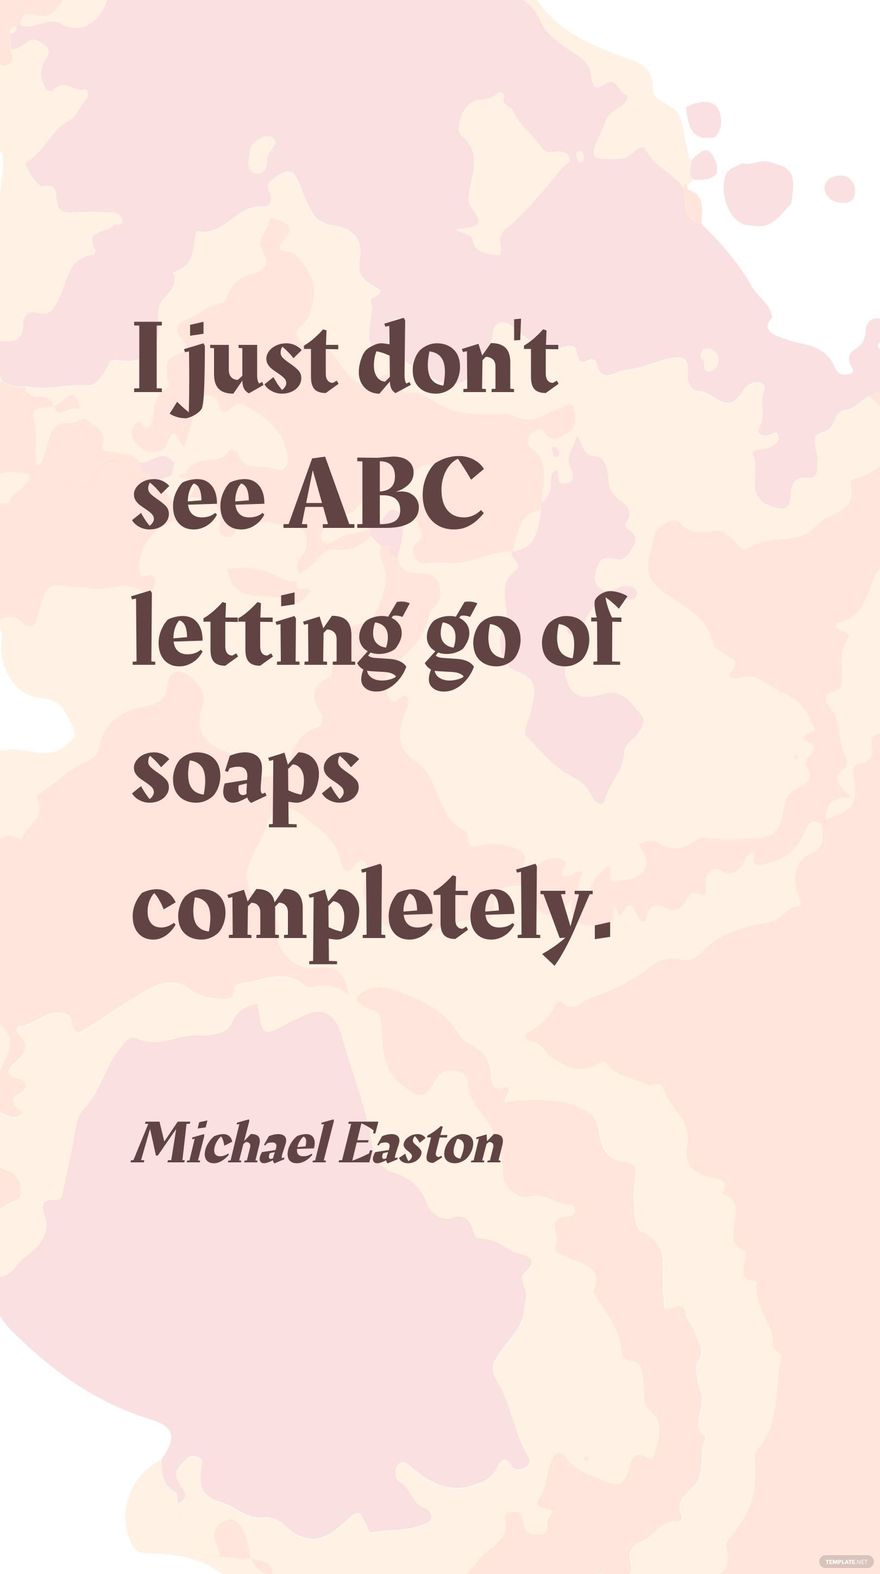 Michael Easton - I just don't see ABC letting go of soaps completely. in JPG